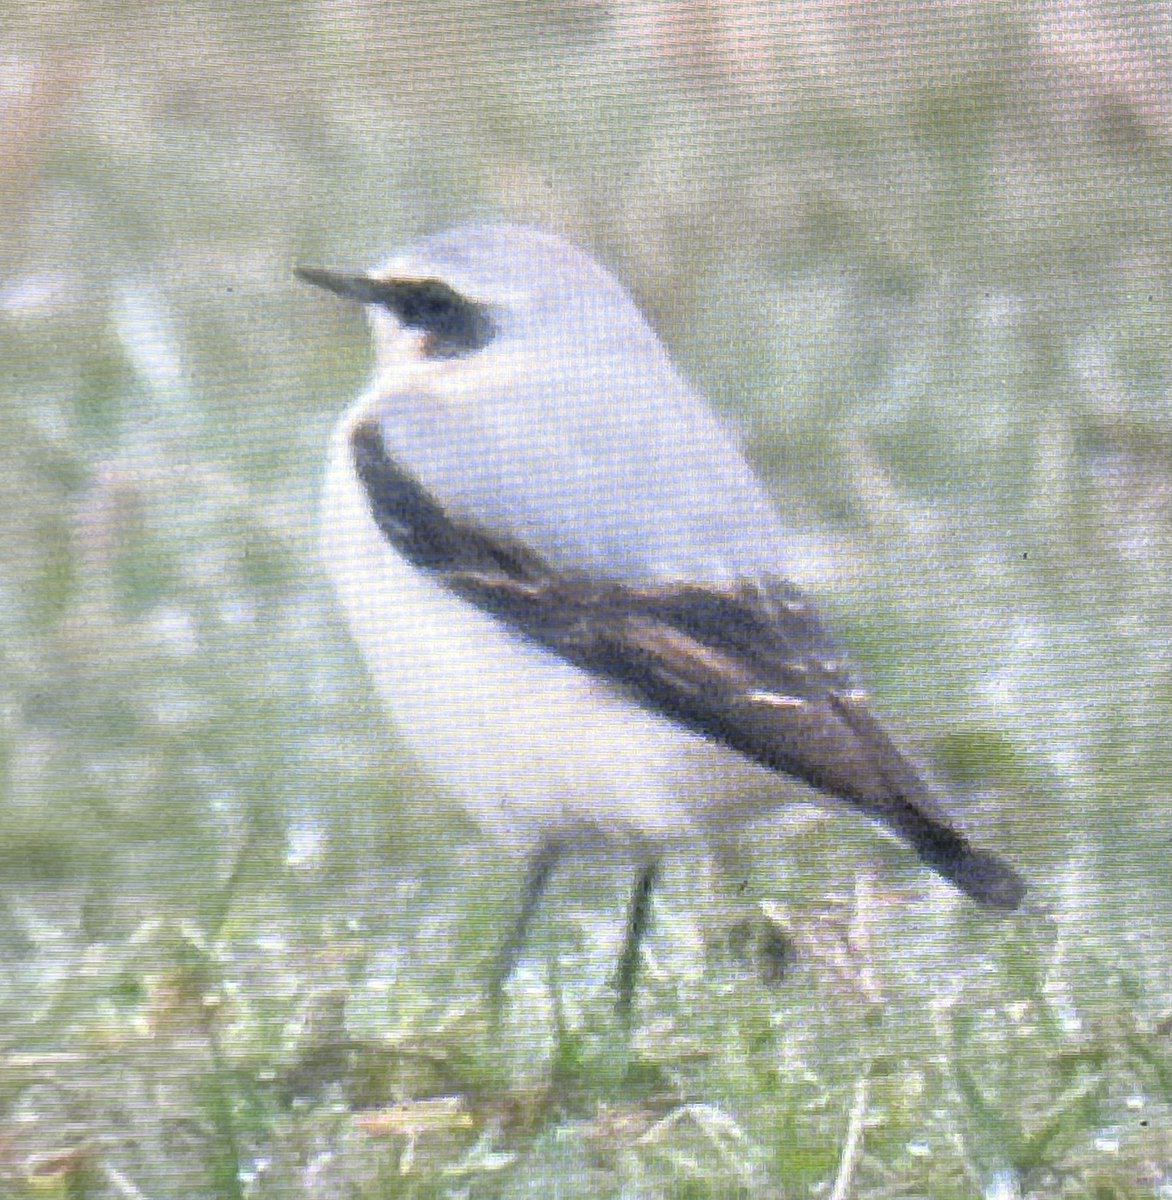 Always great to see a fall of wheatear at Berryhill fields, this morning there were 15 at least, with a backup stonechat. @WestMidBirdClub @sbhfag